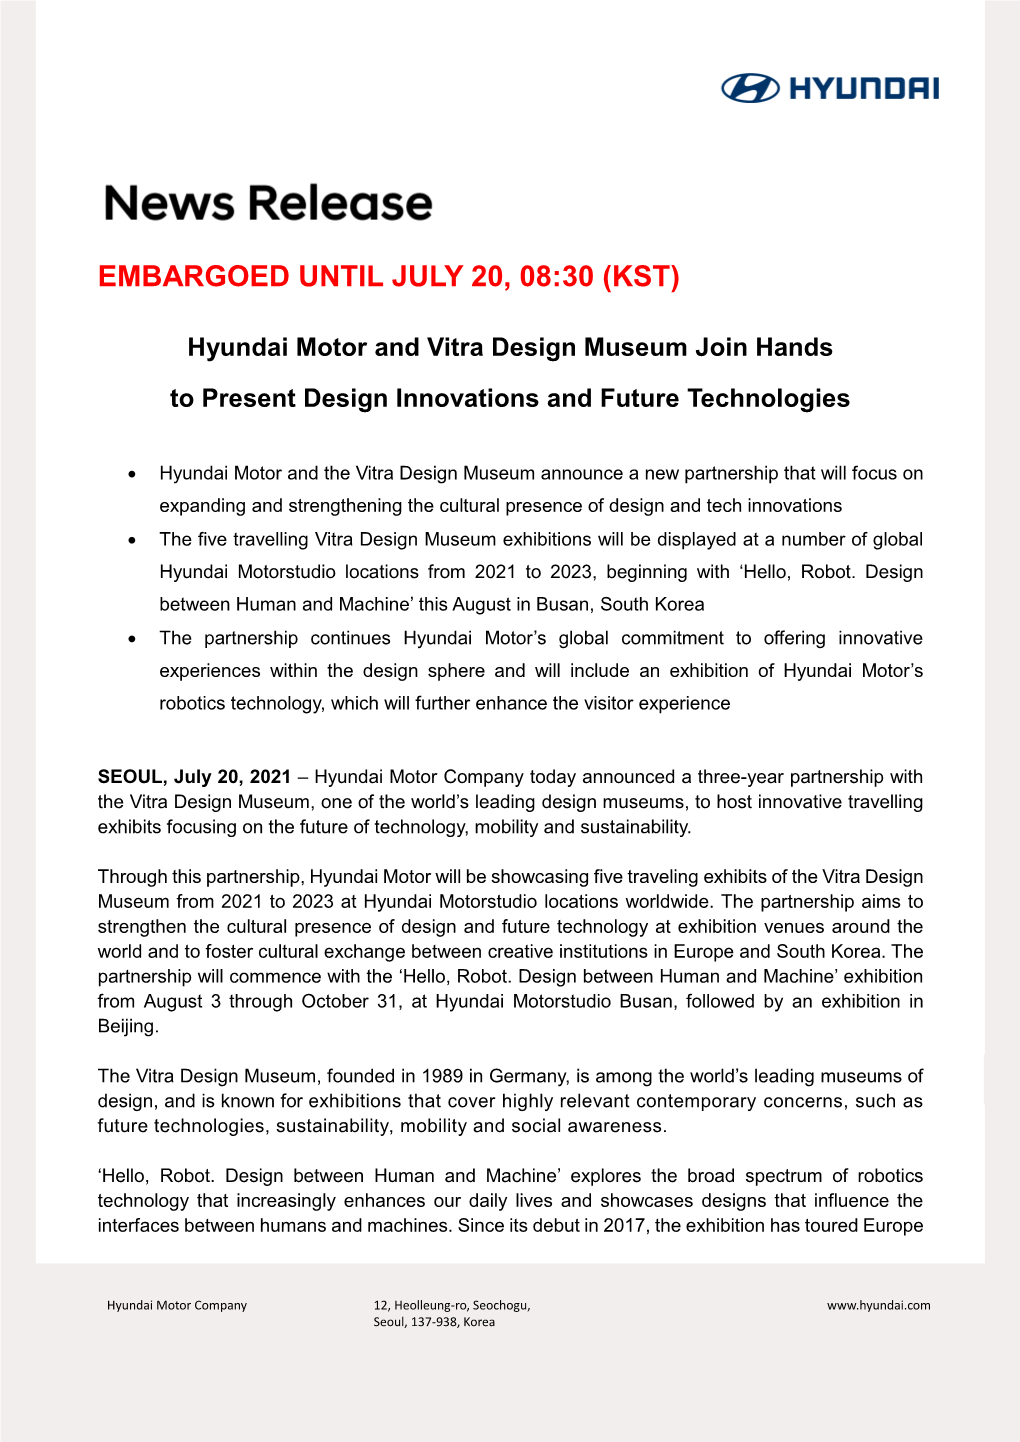 EMBARGOED UNTIL JULY 20, 08:30 (KST) Hyundai Motor and Vitra Design Museum Join Hands to Present Design Innovations and Future Technologies